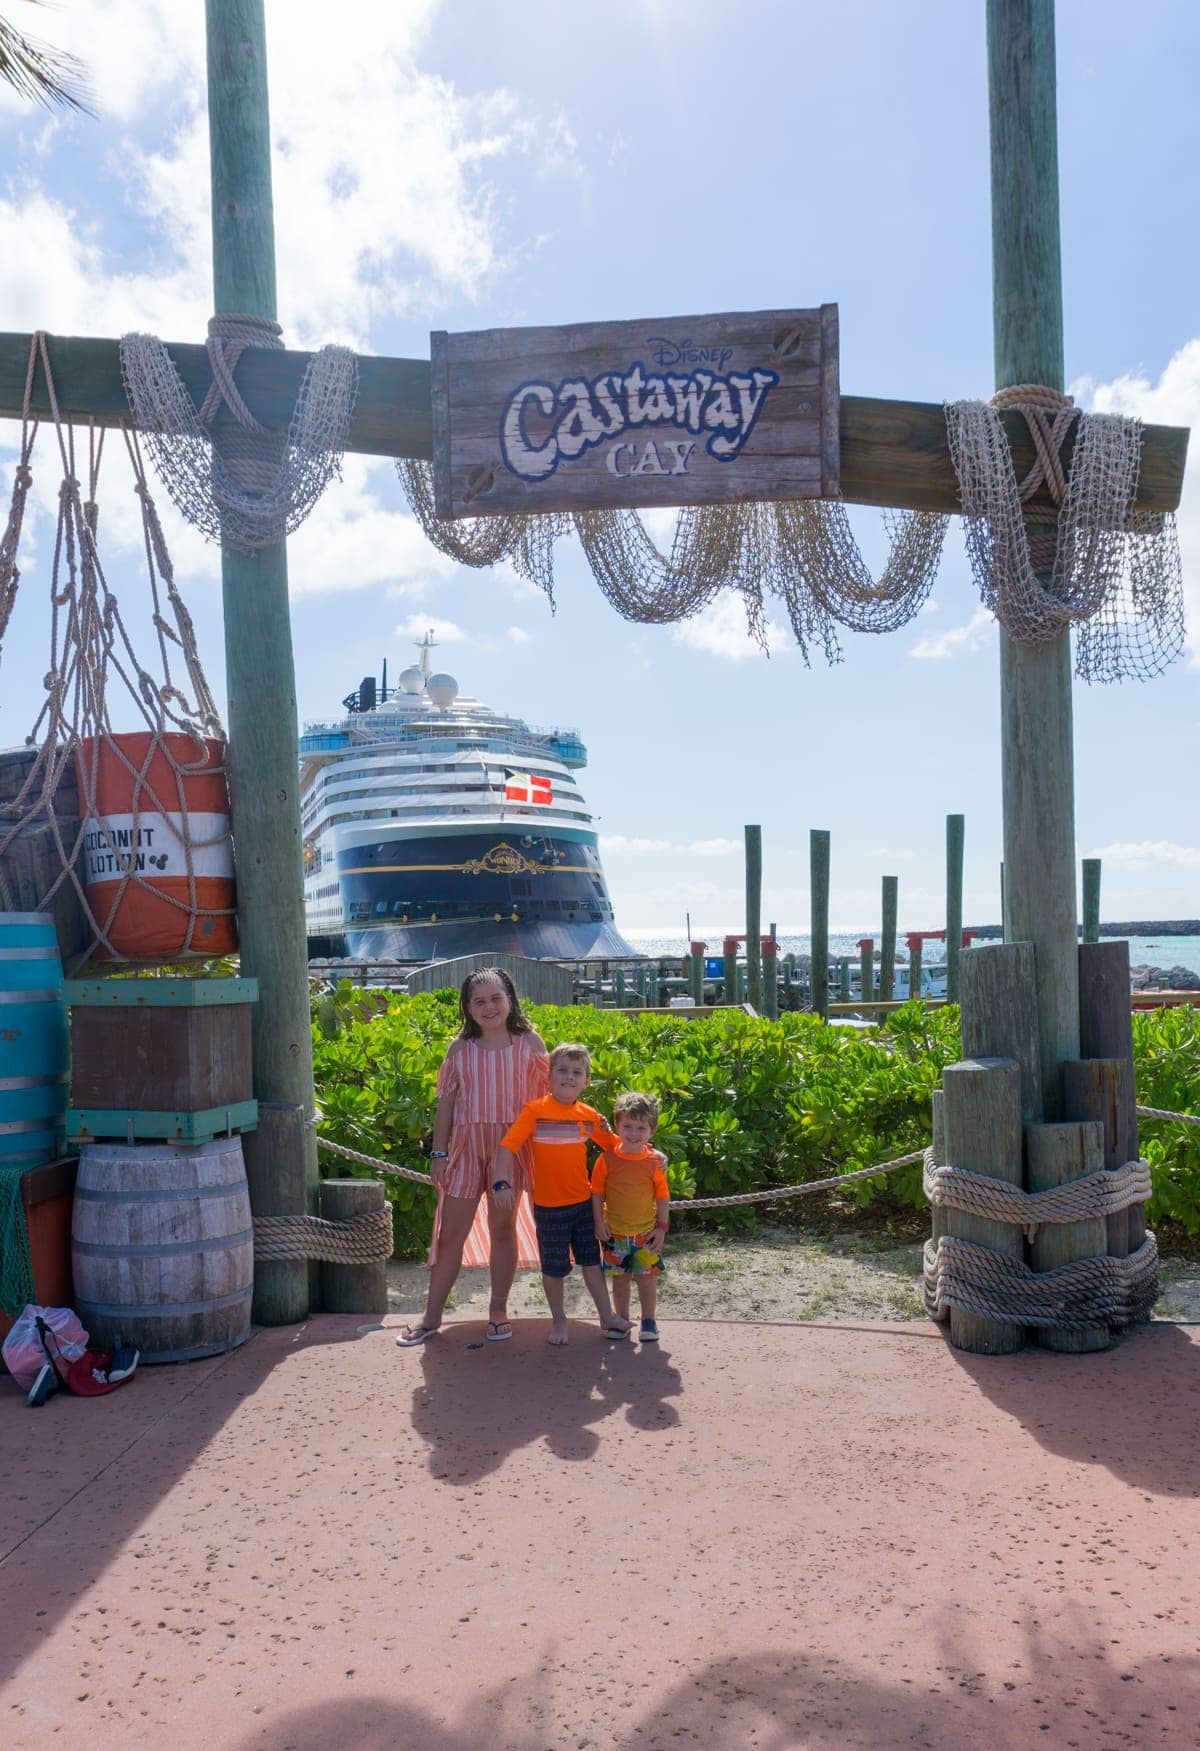 The kids with the Disney cruise ship behind them